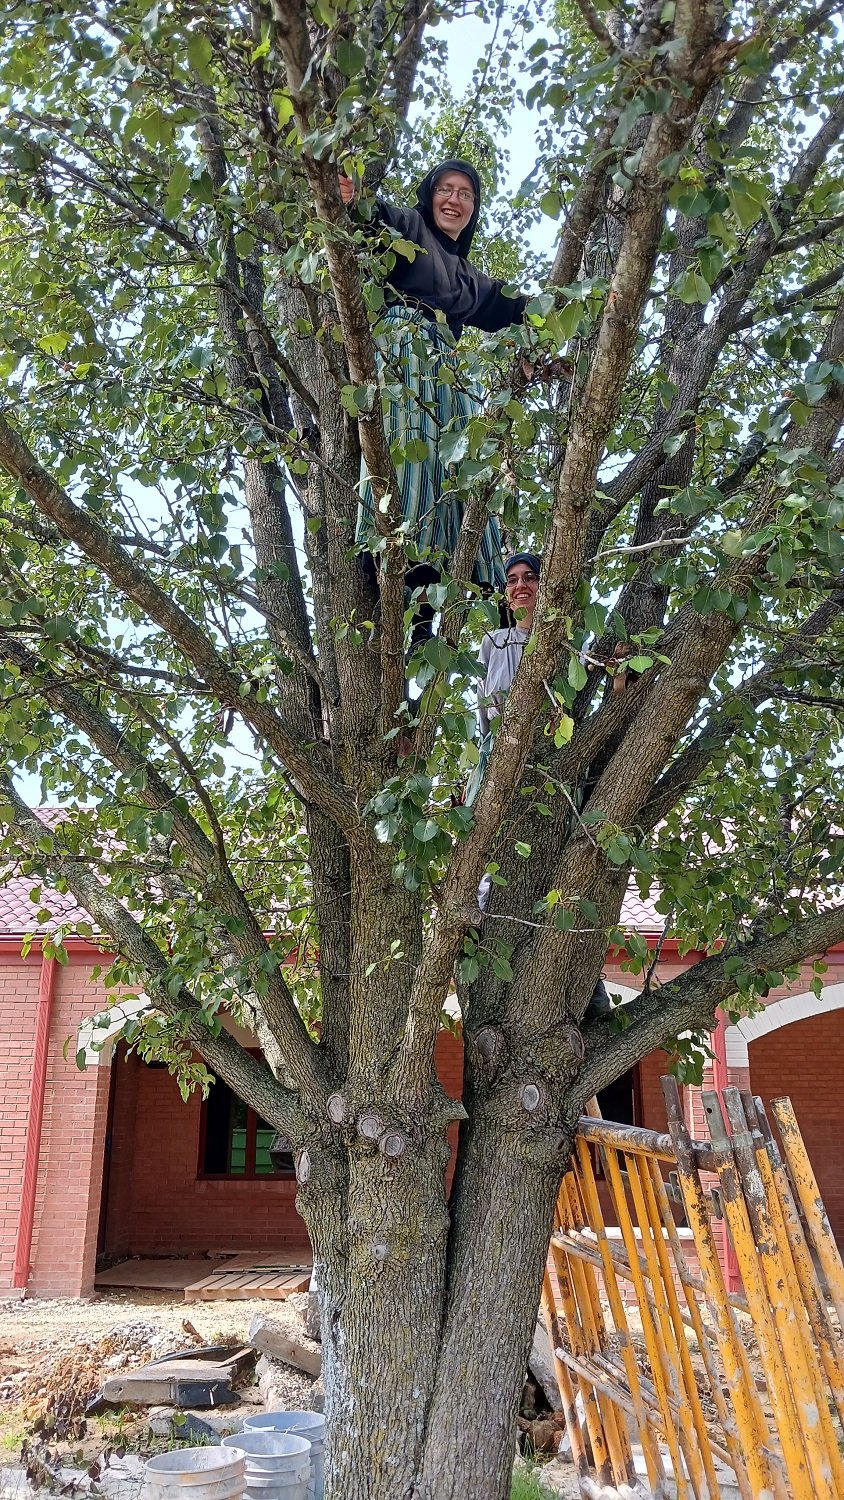  Shades of  The Sound of Music  — Sisters Mary Andrea and Frances Marie decided to climb our pear tree! 